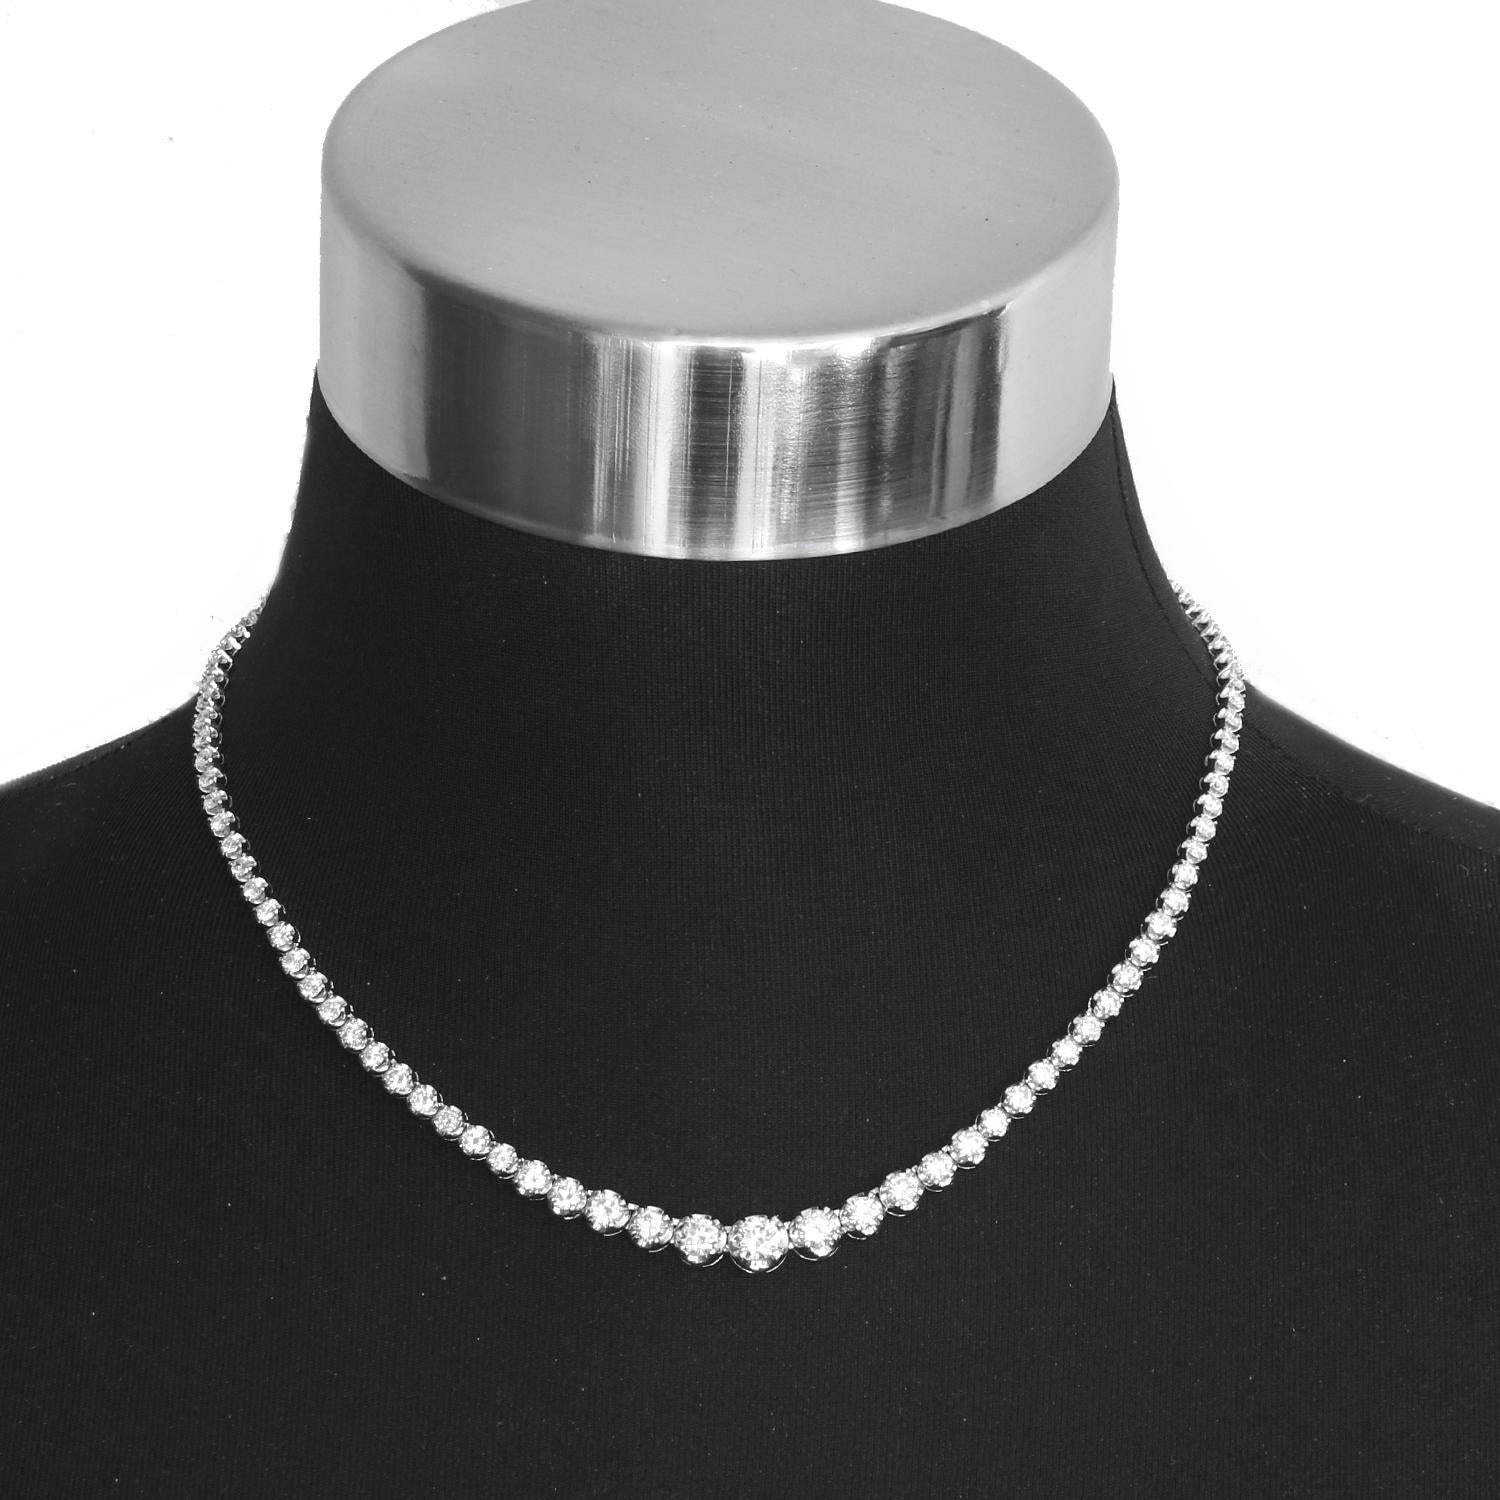 Platinum Mounting 10 ct Diamond Necklace - This is stunning 10 ct necklace set in platinum has round brilliant diamond that are gradually increasing and reach its peak in the middle. Total weight 25.6 grams.  Princess length at 16